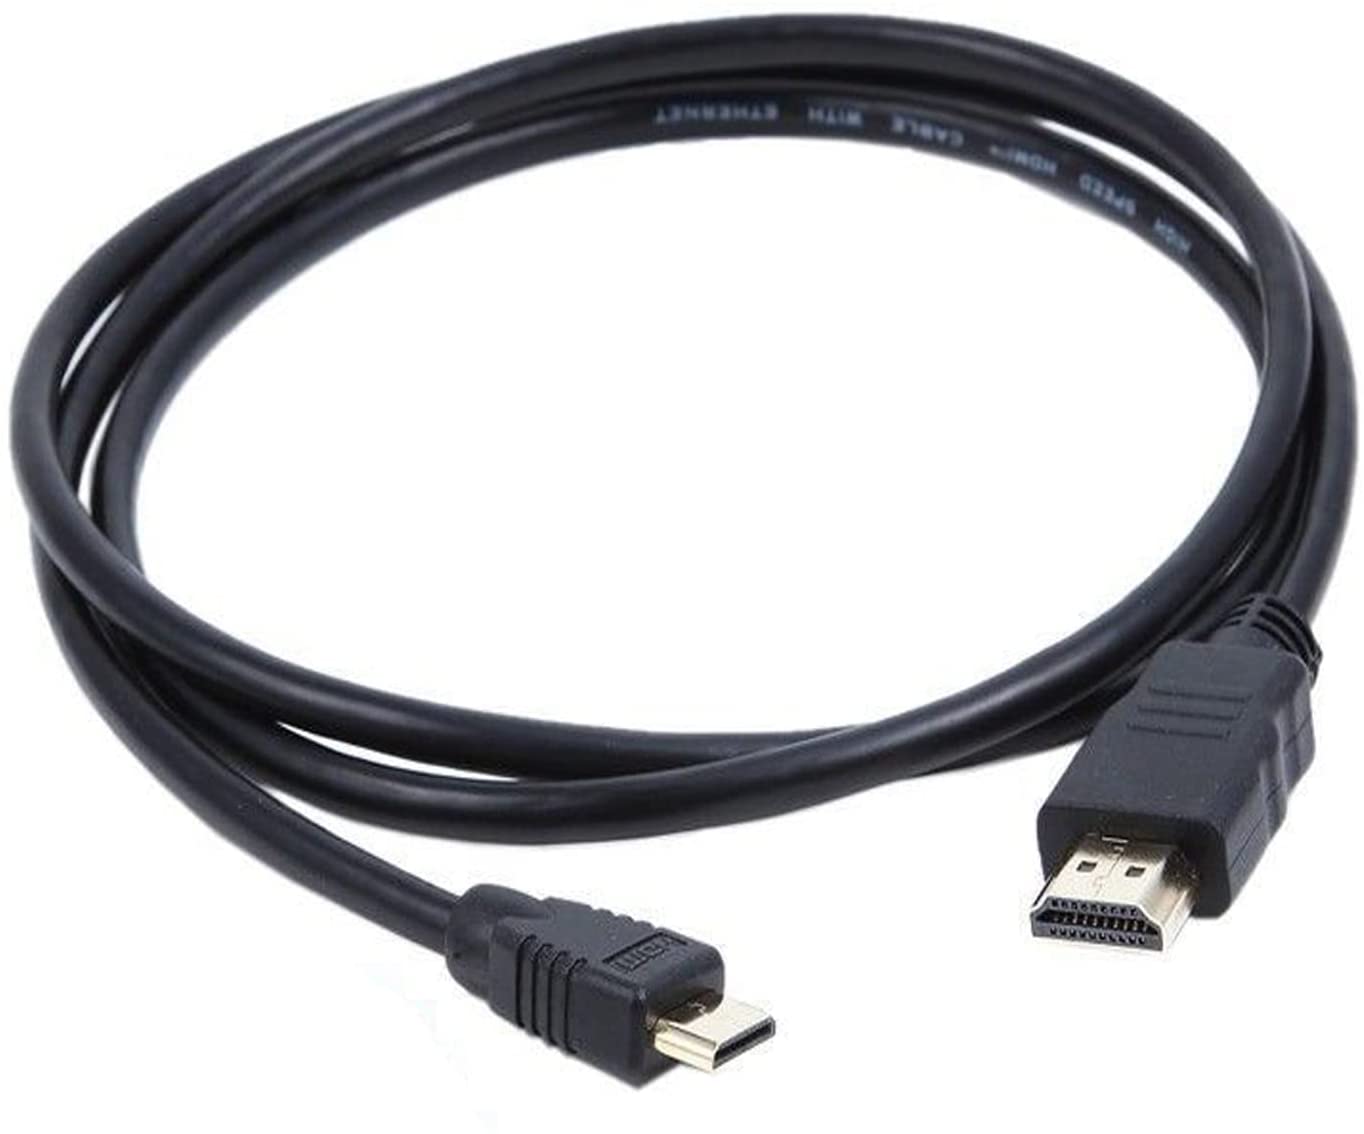 UPBRIGHT NEW HDMI to Mini HDMI C AV TV-Out Lead Cable Cord For Sony Alpha Digital SLR Camera,NEX-3 K/S K/B to HDTV,NEX-5 K/S K/B to HDTV,A330 10.2 MP Digital SLR Camera,A35 16.2 MP Digital SLR Camera, - image 2 of 5